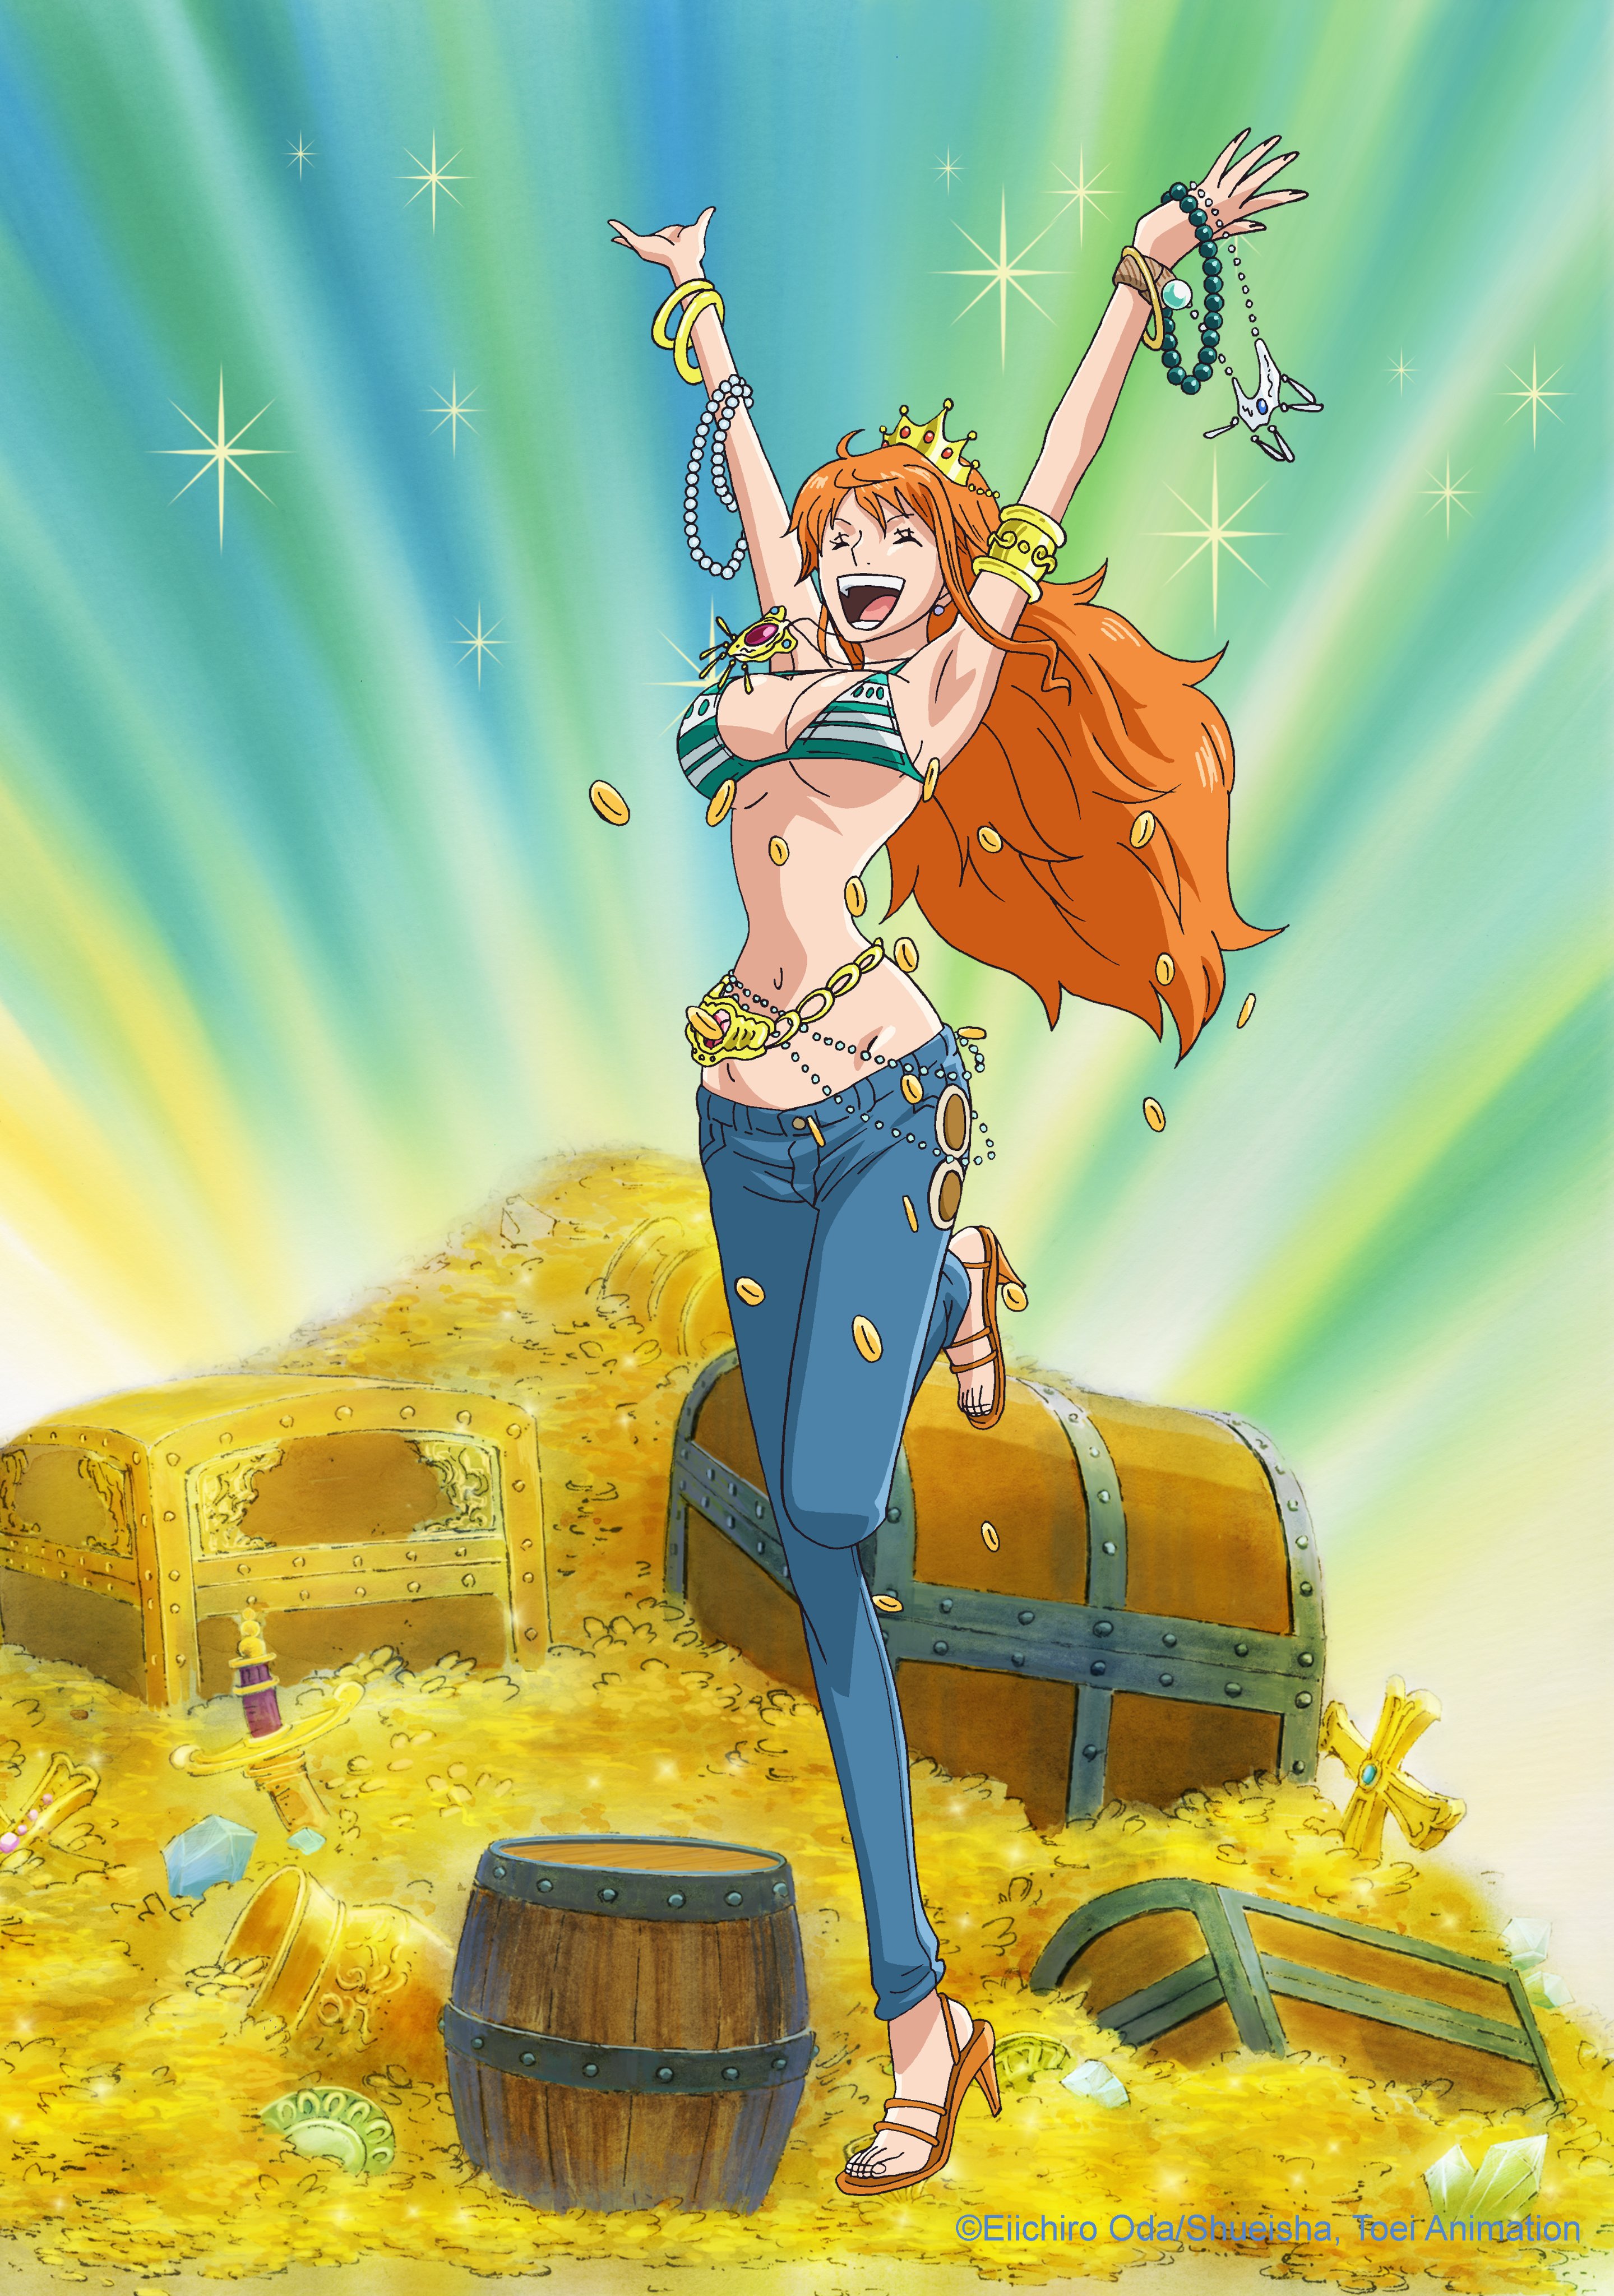 Toei Animation - Nami's Climate Baton is now more powerful than